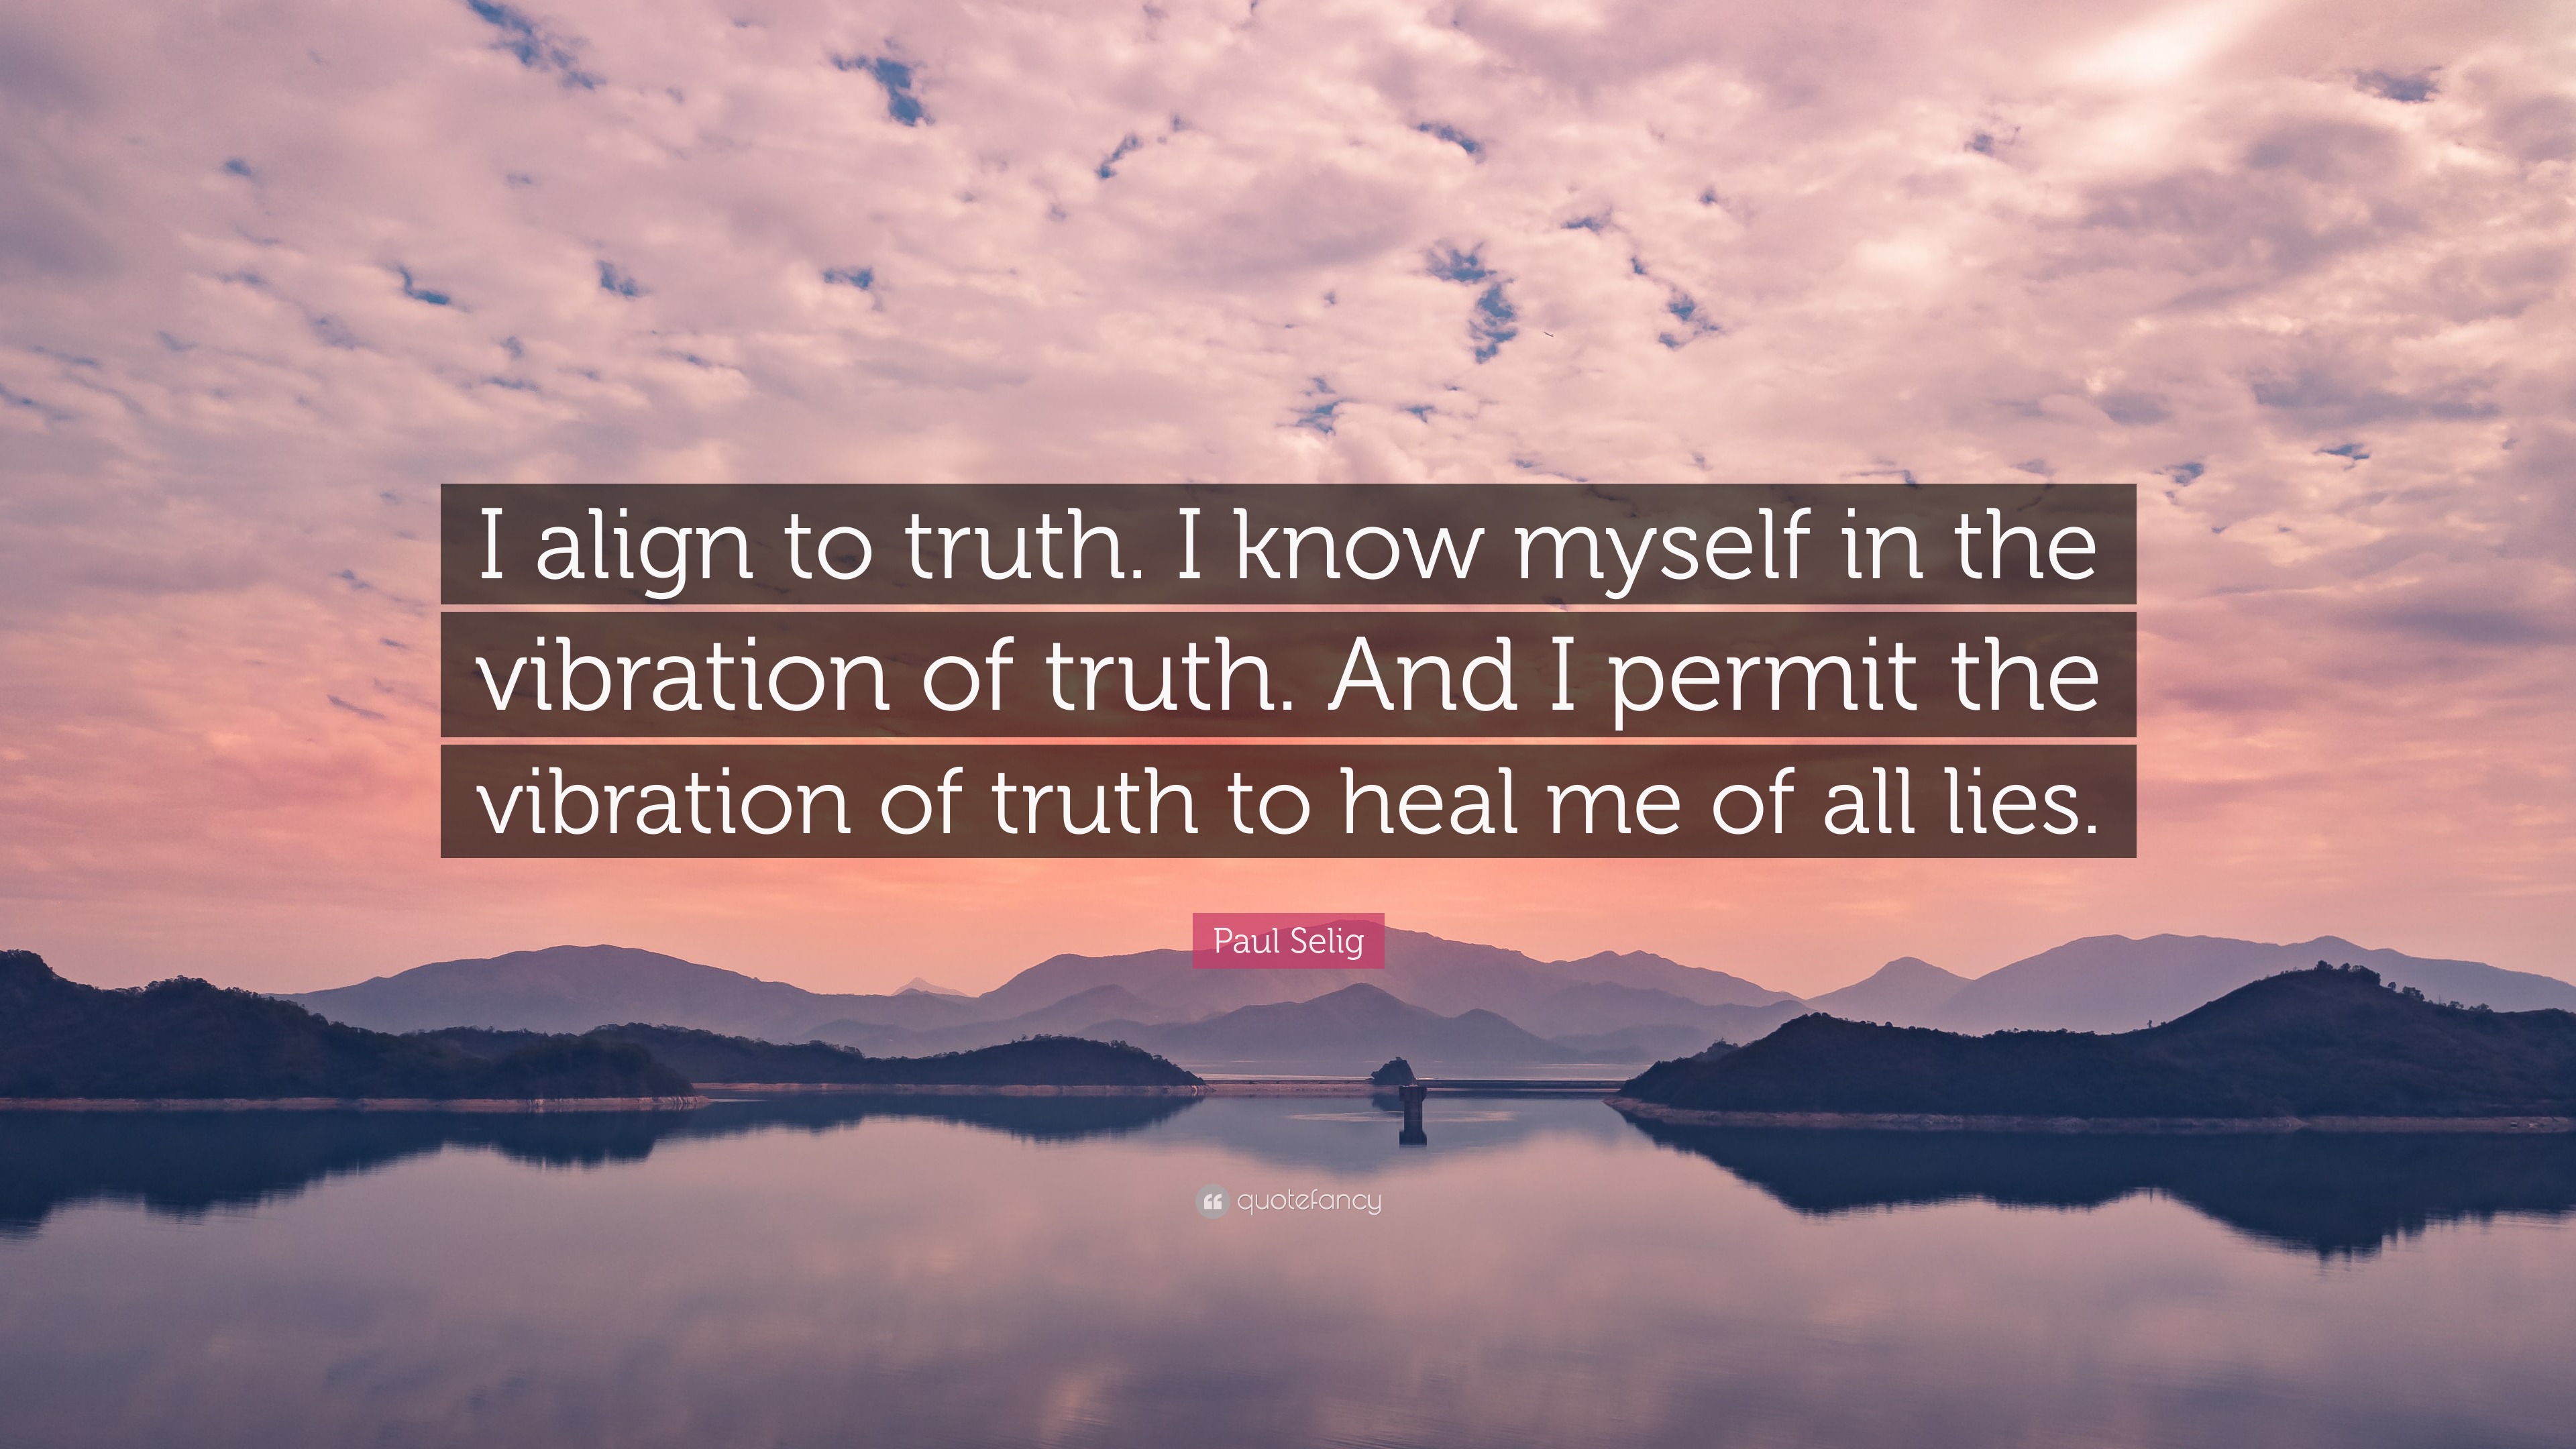 Paul Selig Quote “I align to truth. I know myself in the vibration of